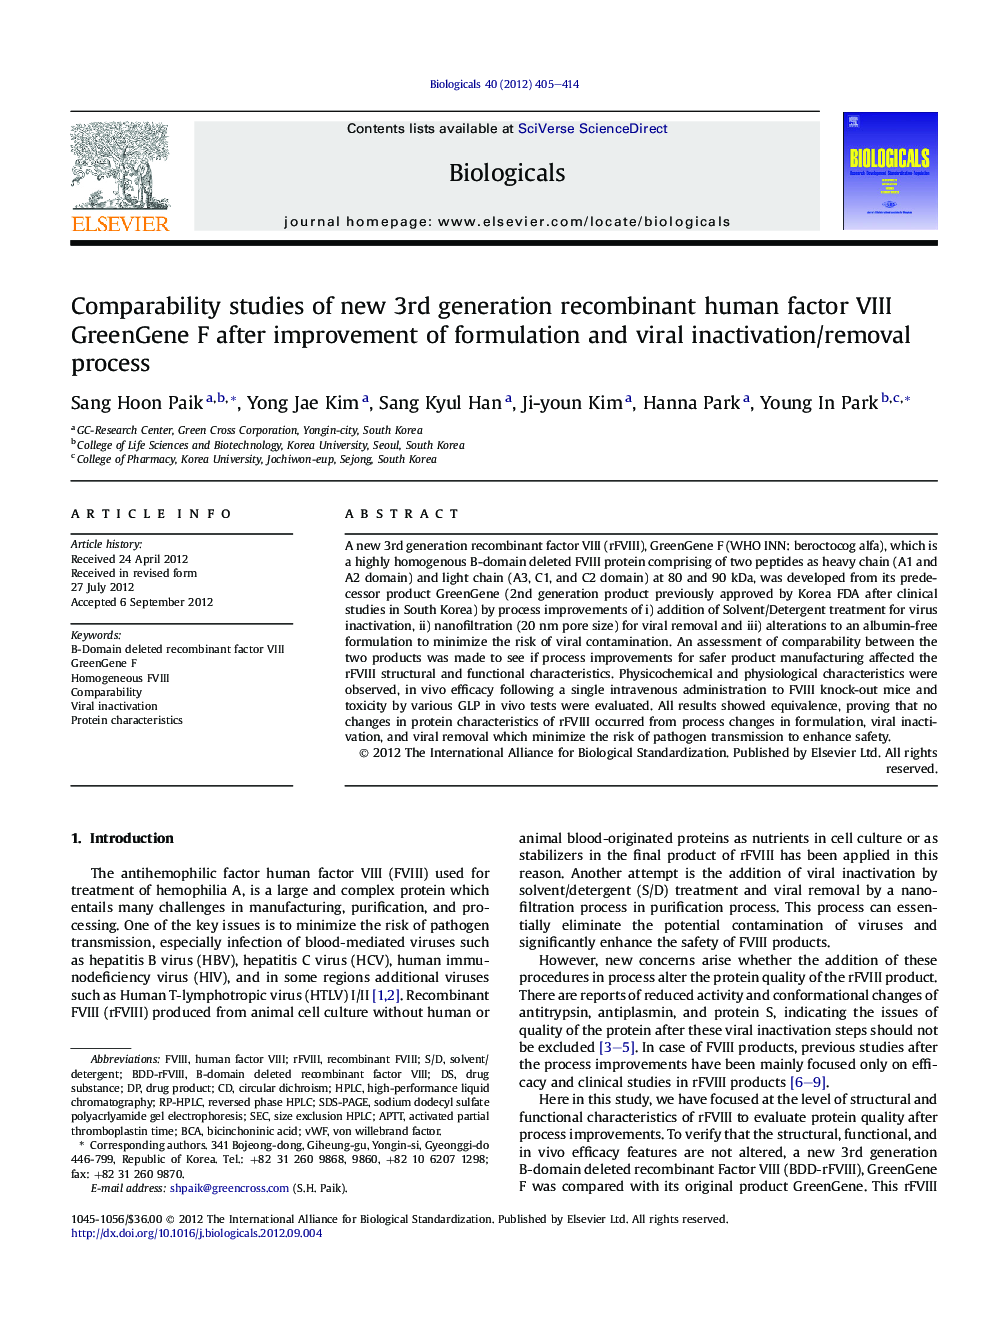 Comparability studies of new 3rd generation recombinant human factor VIII GreenGene F after improvement of formulation and viral inactivation/removal process